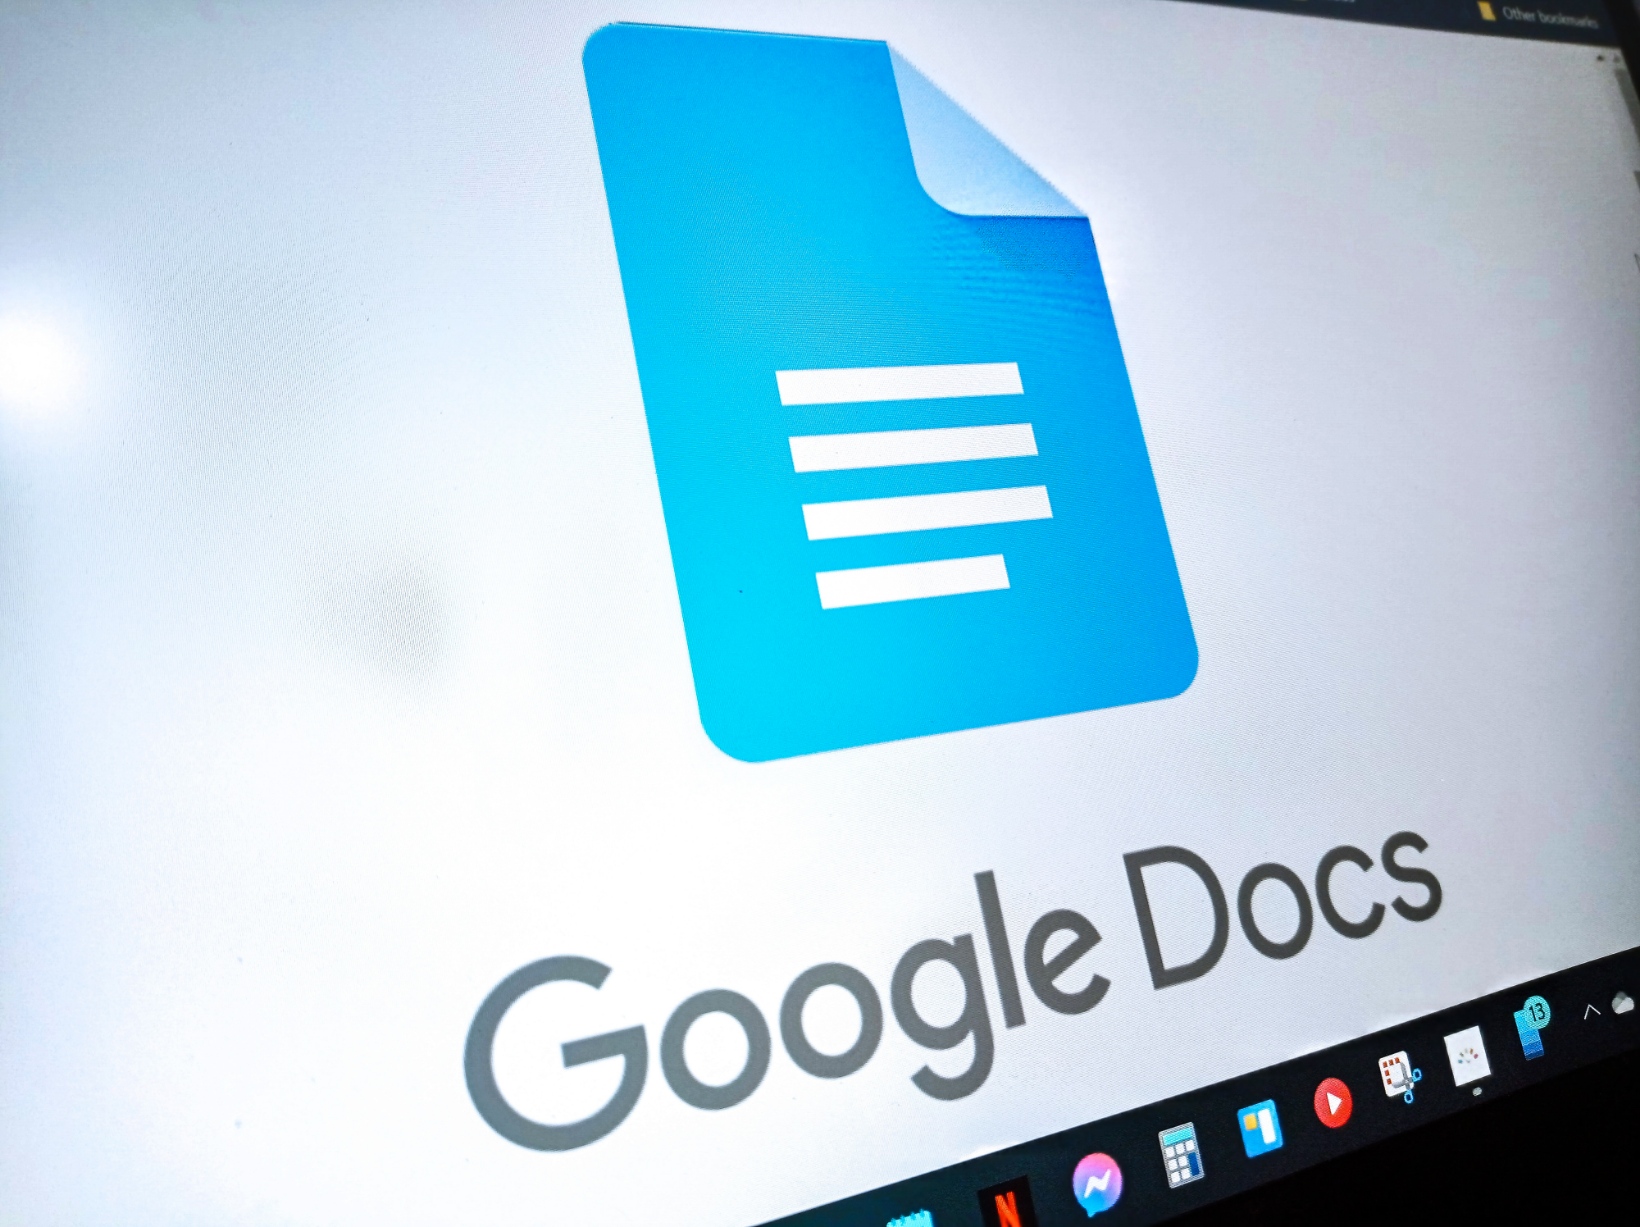 Google Docs eliminates page breaks, uses Smart Canvas to get new document summaries